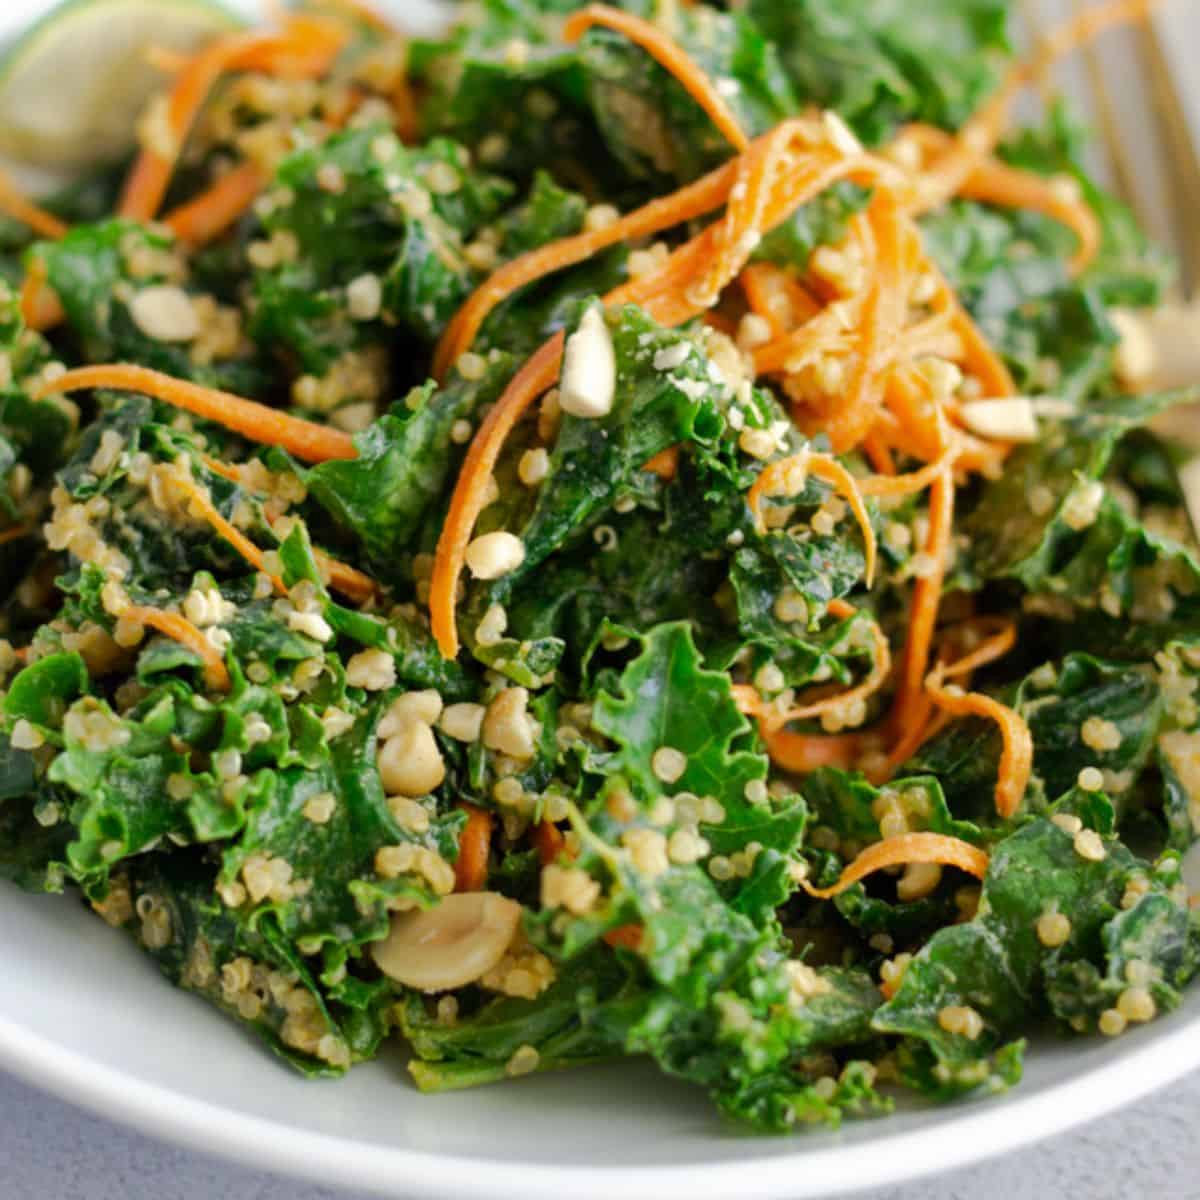 Meal Prep Kale and Quinoa Salad with Peanut Dressing